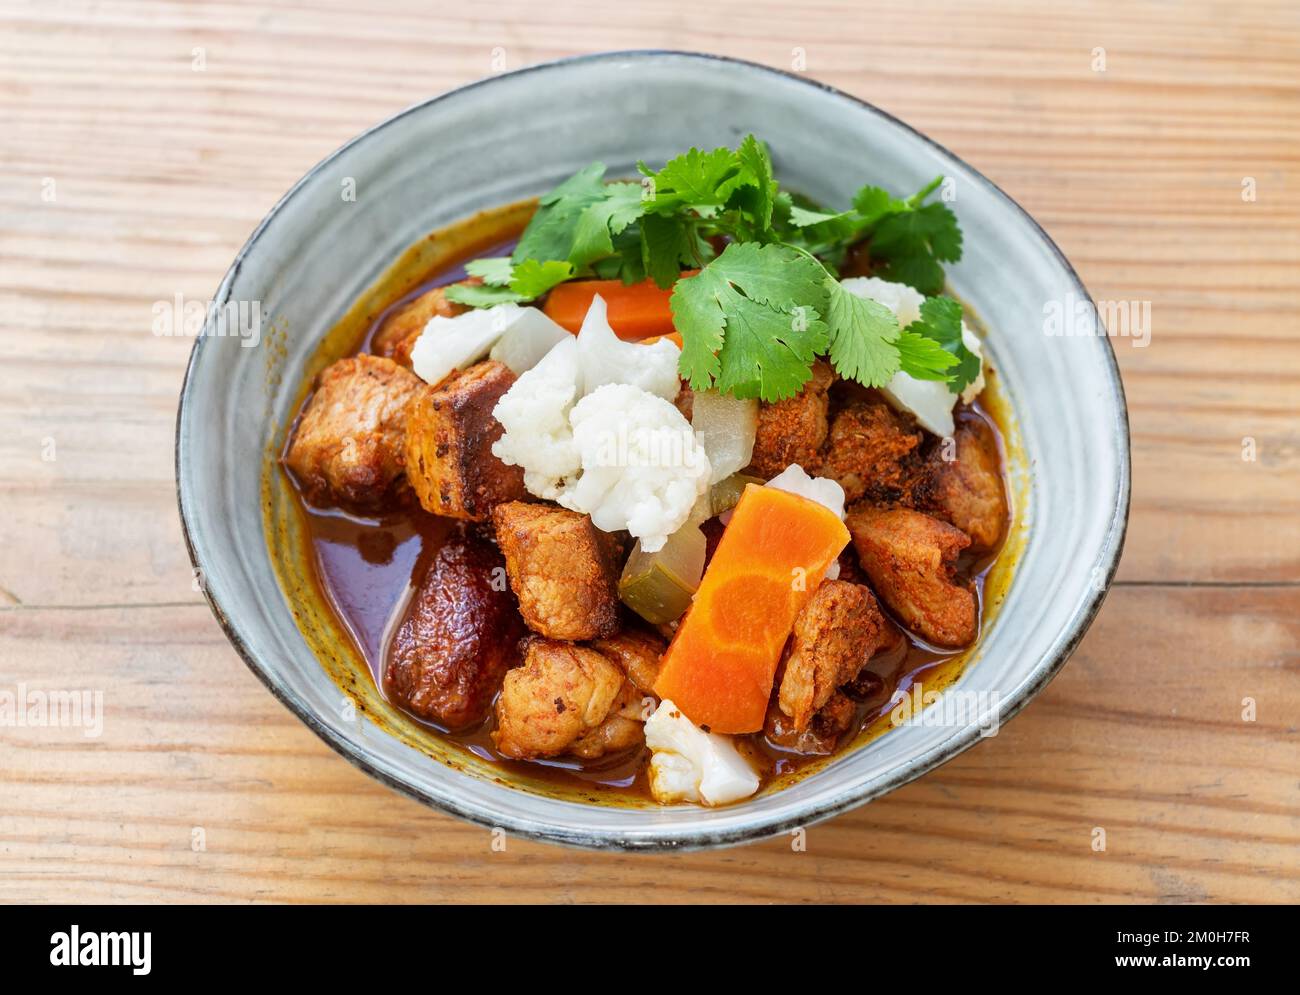 Pica pau traditional portuguese food spicy pork stew dish. Top view in certamic plate Stock Photo